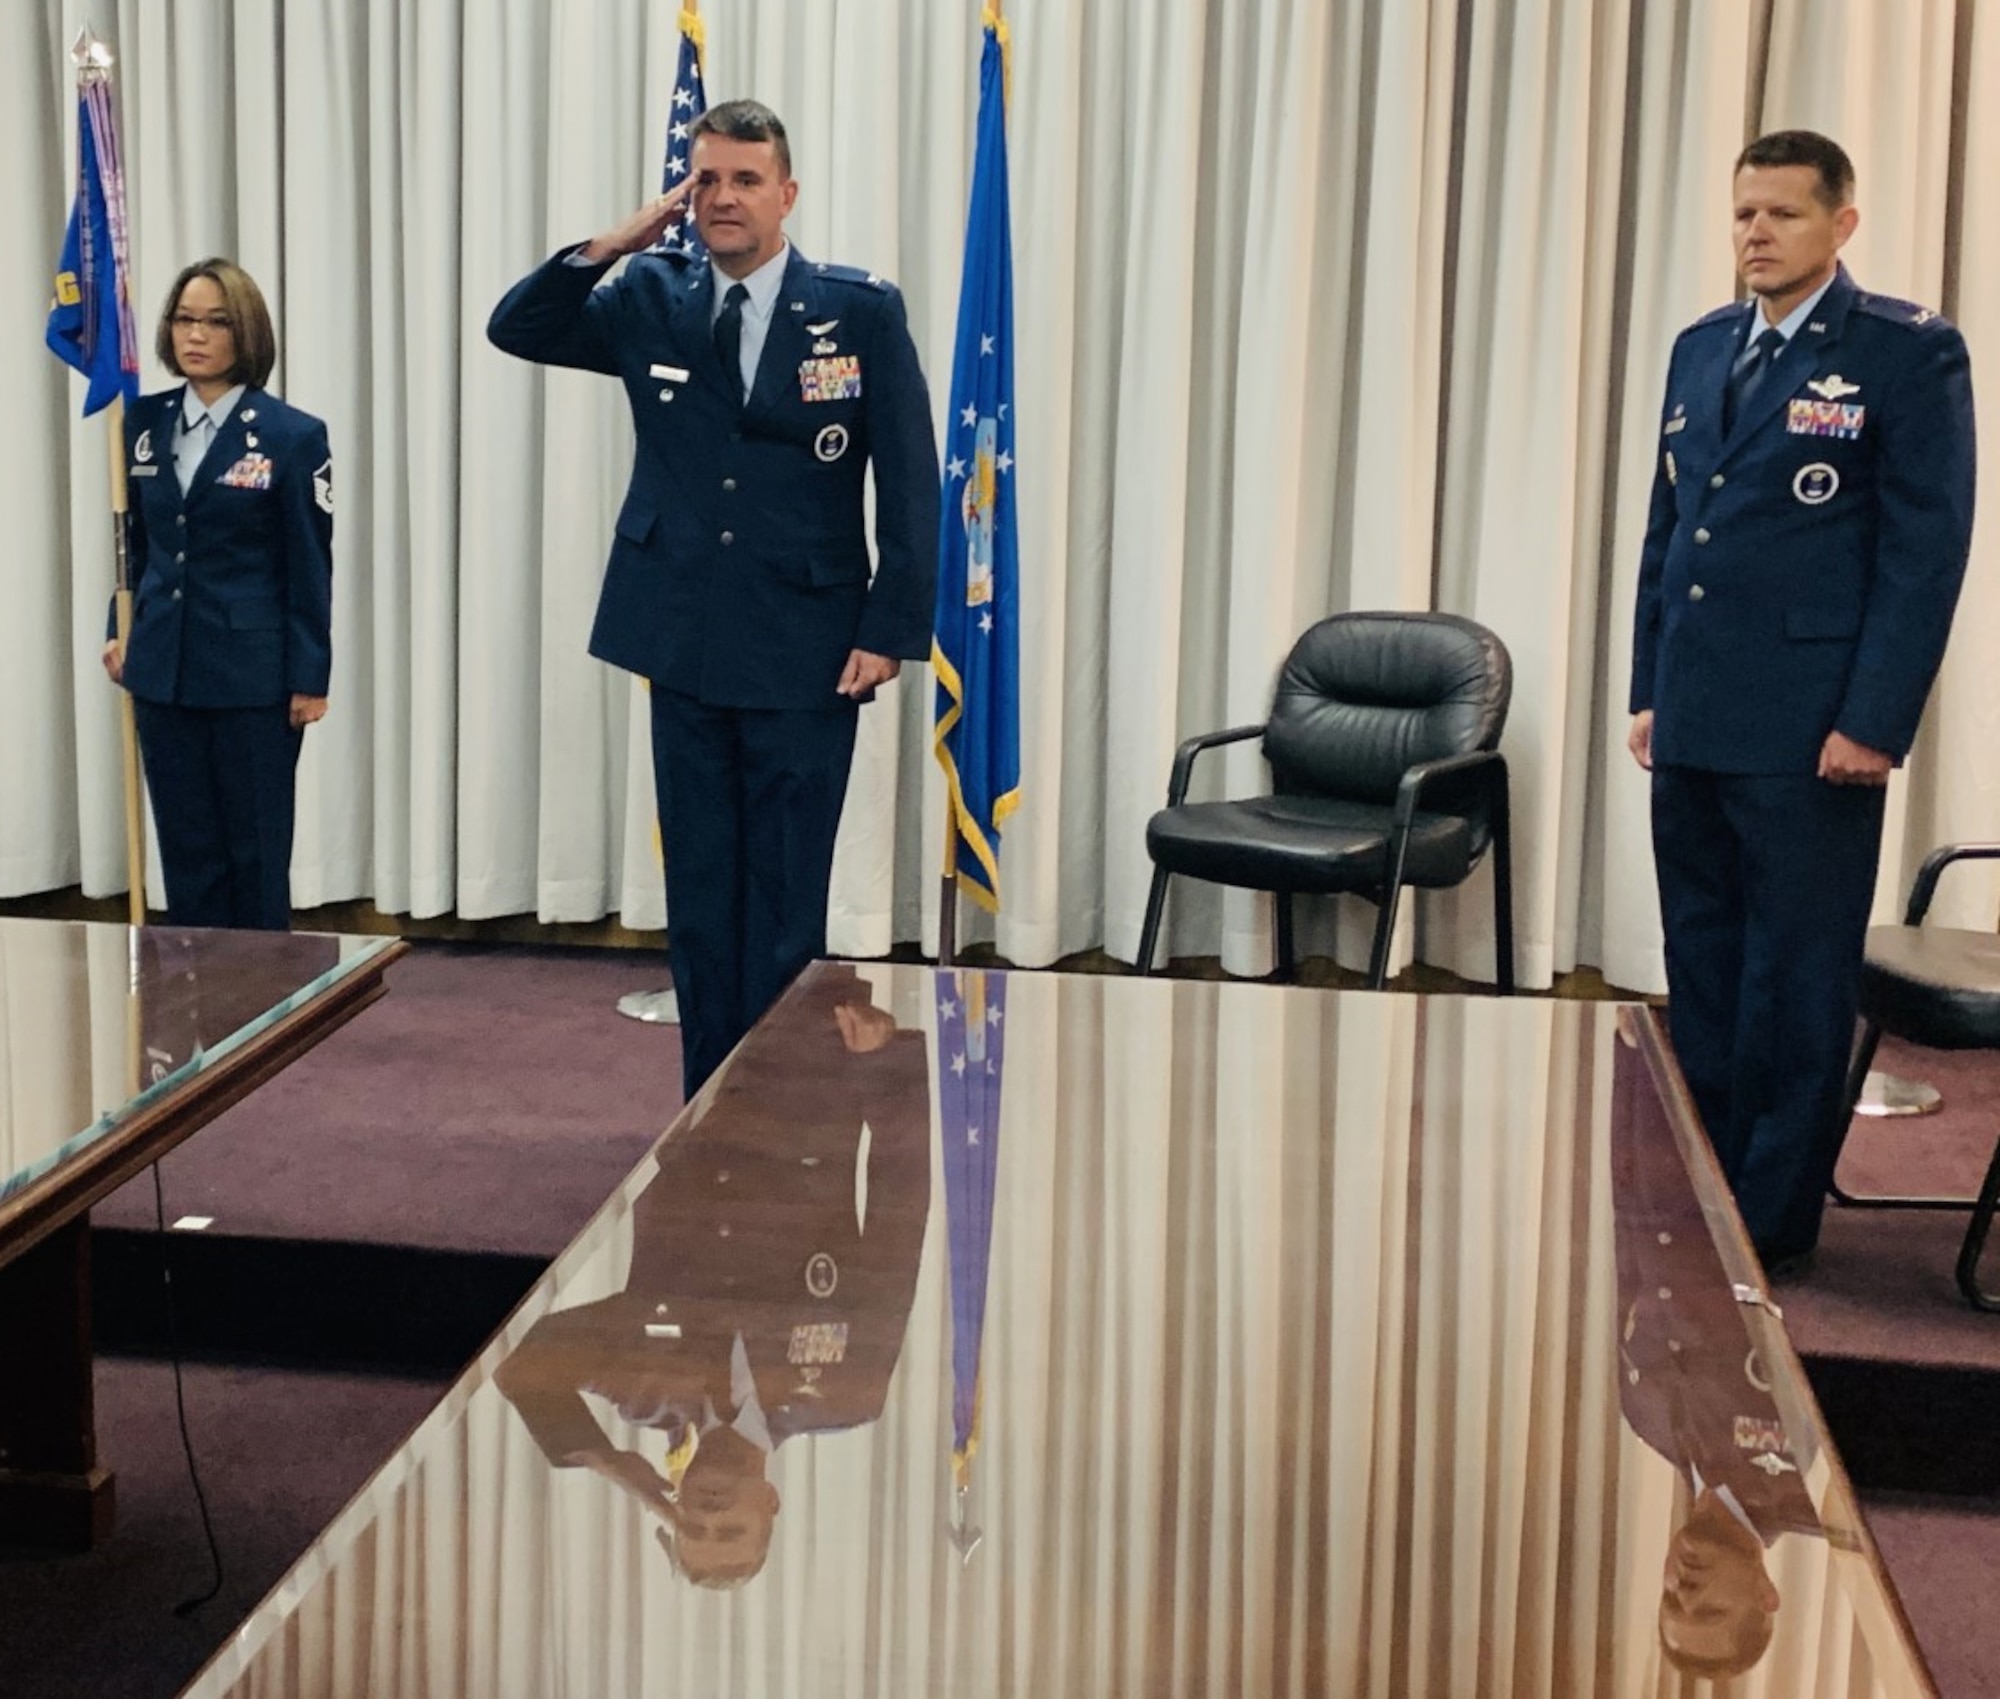 Air Force Recruiting Service hosts a virtual change of command ceremony for the 372nd Recruiting Group.